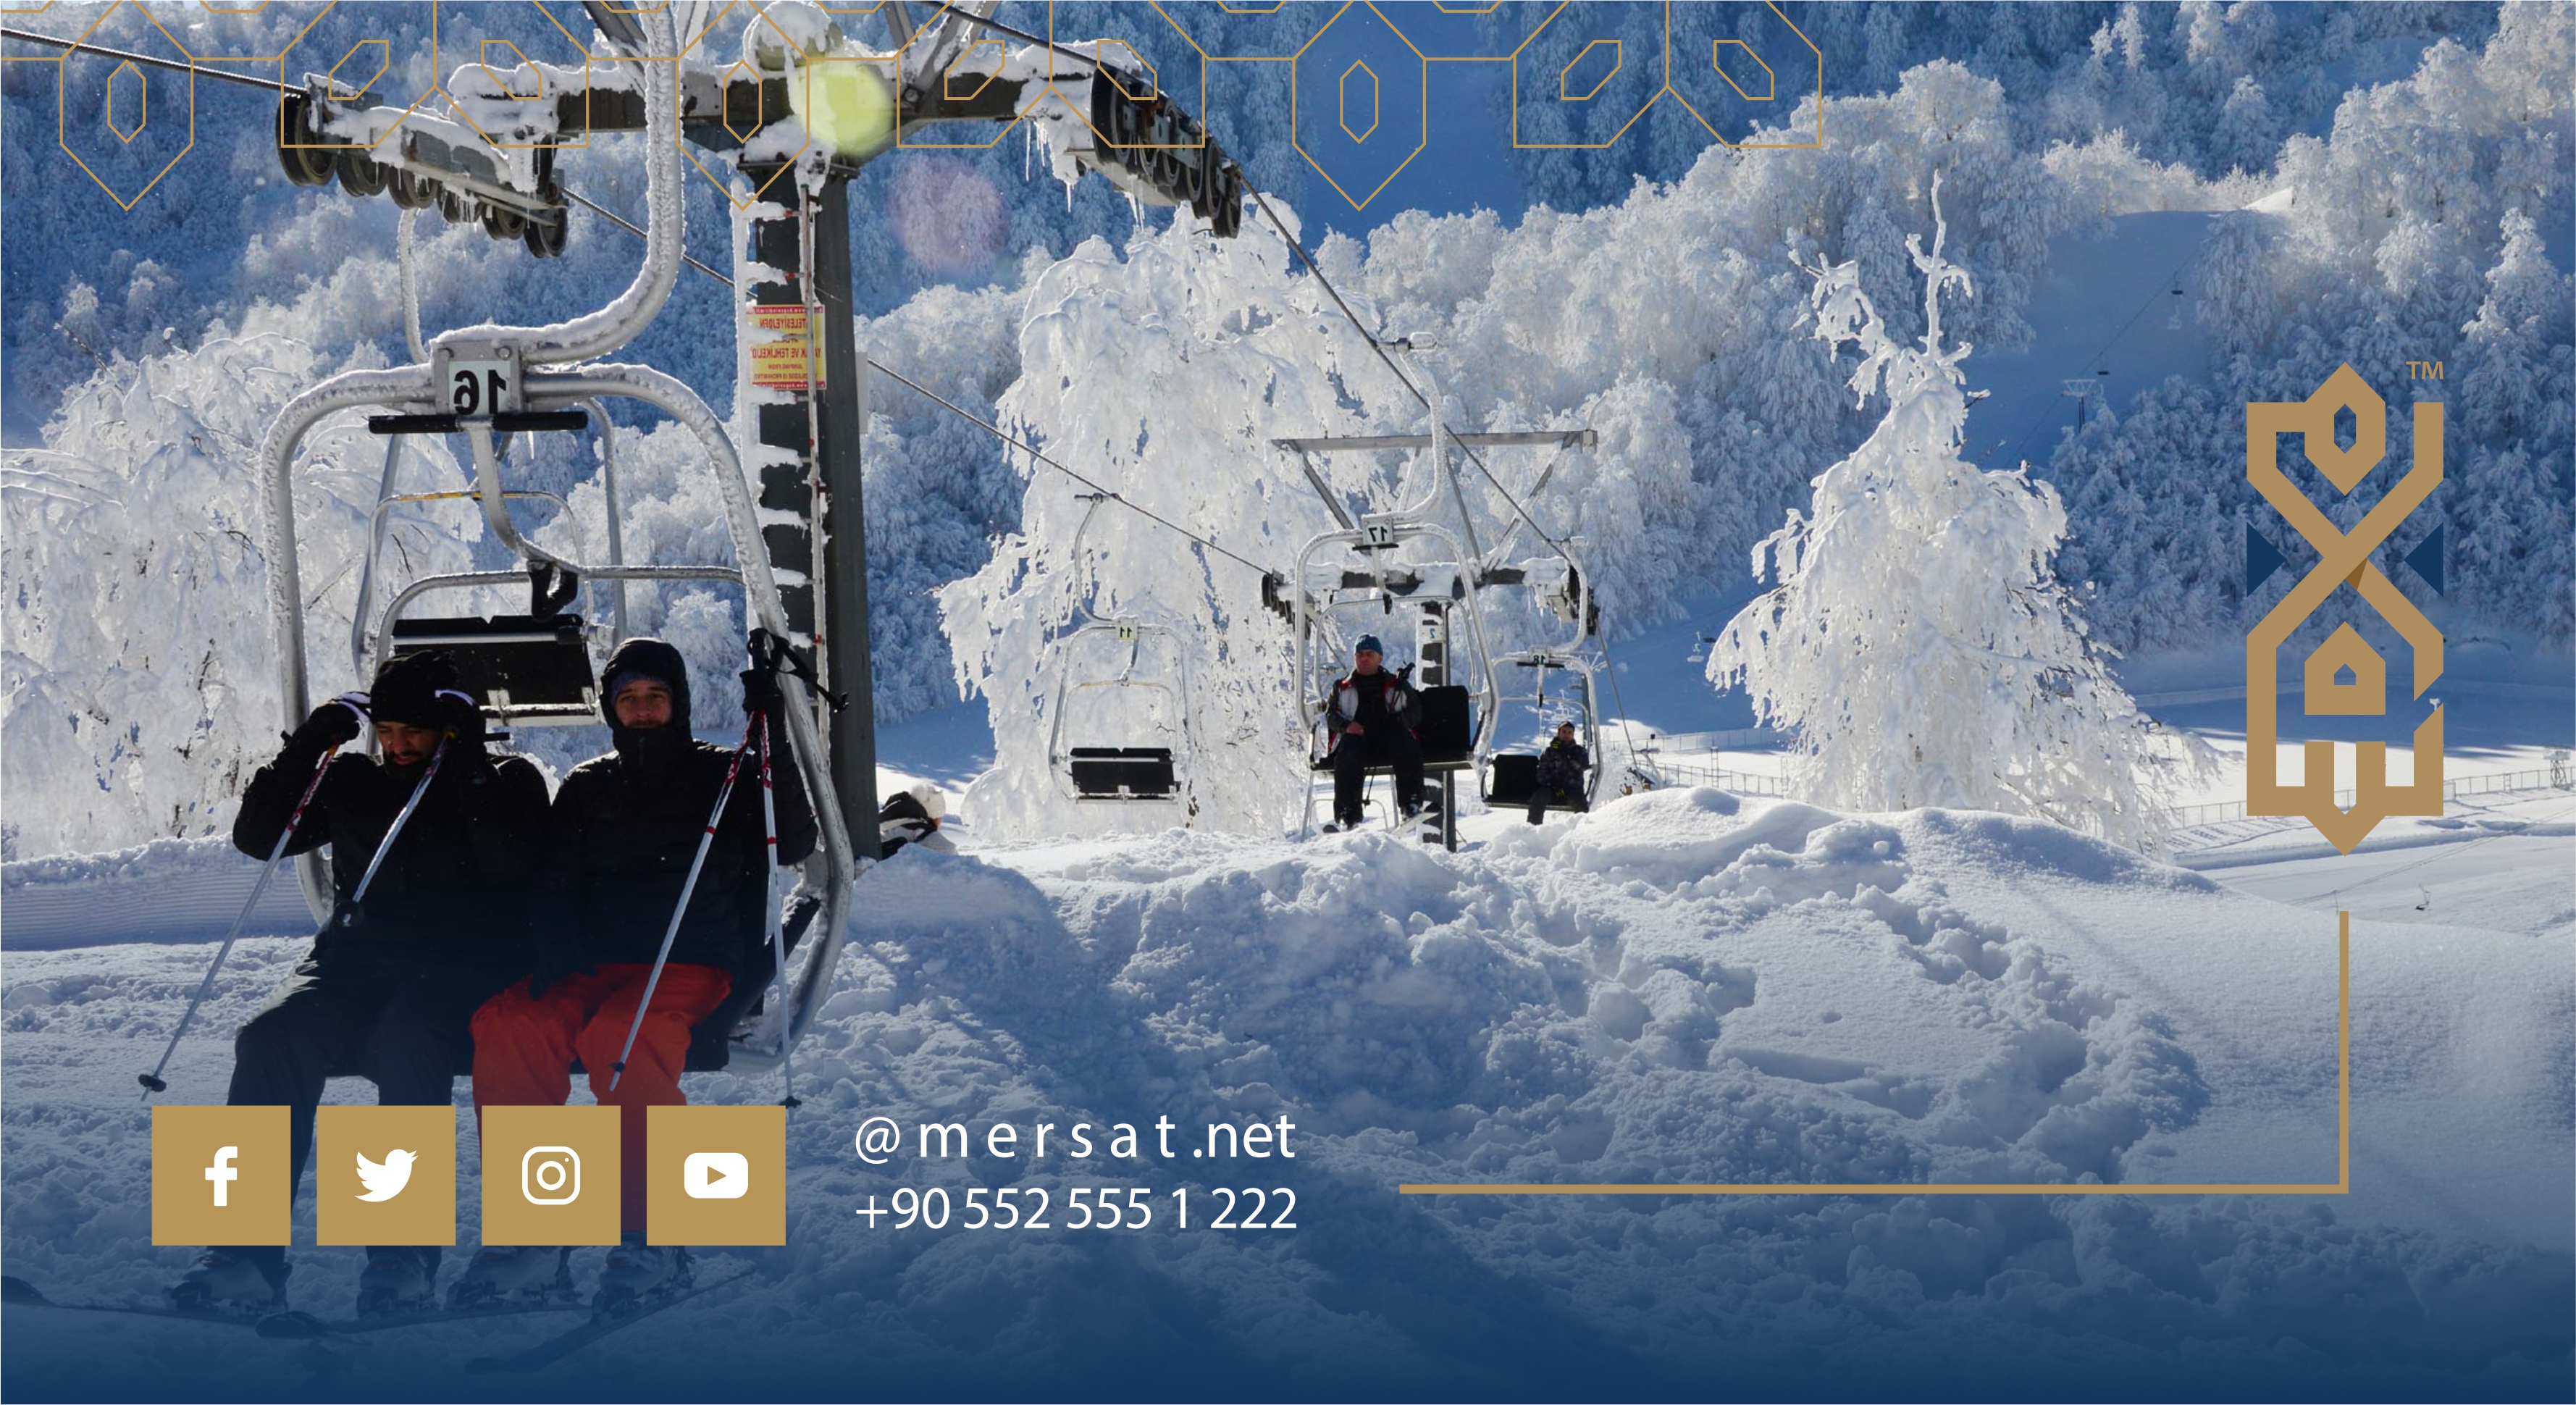 What are the winter tourism destinations in Turkey?